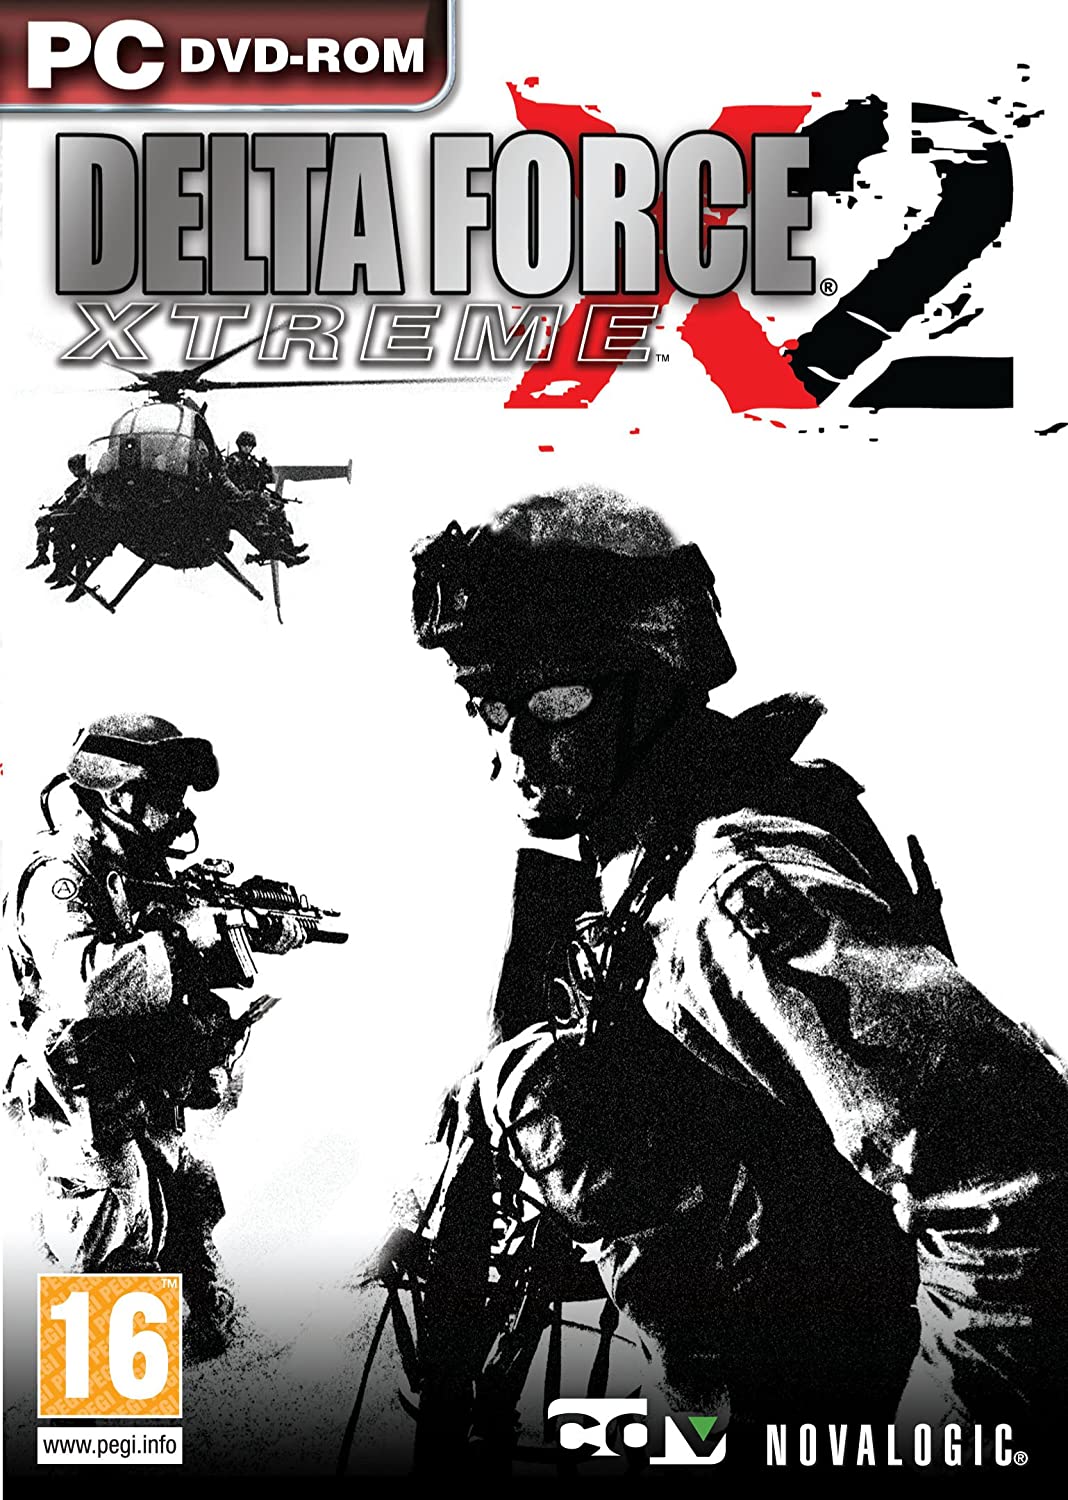 Delta Force Xtreme 2 (PC-DVD)